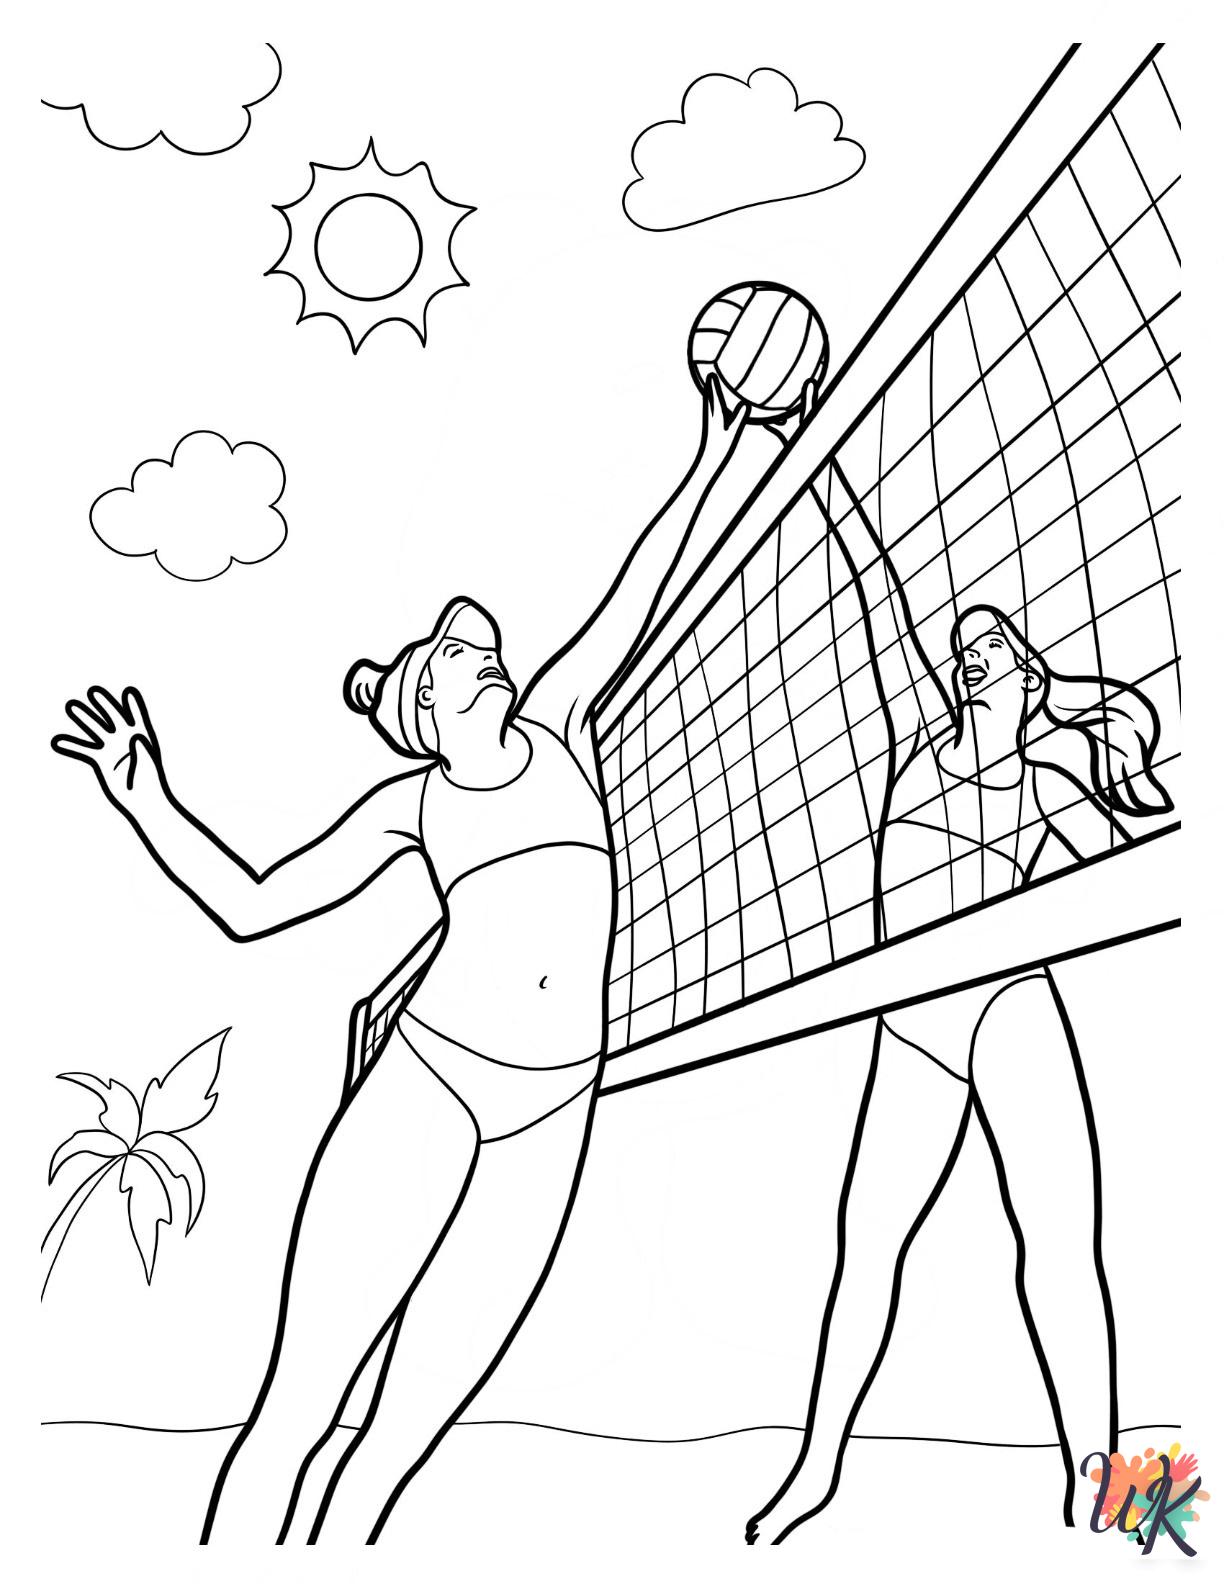 Volleyball coloring book pages